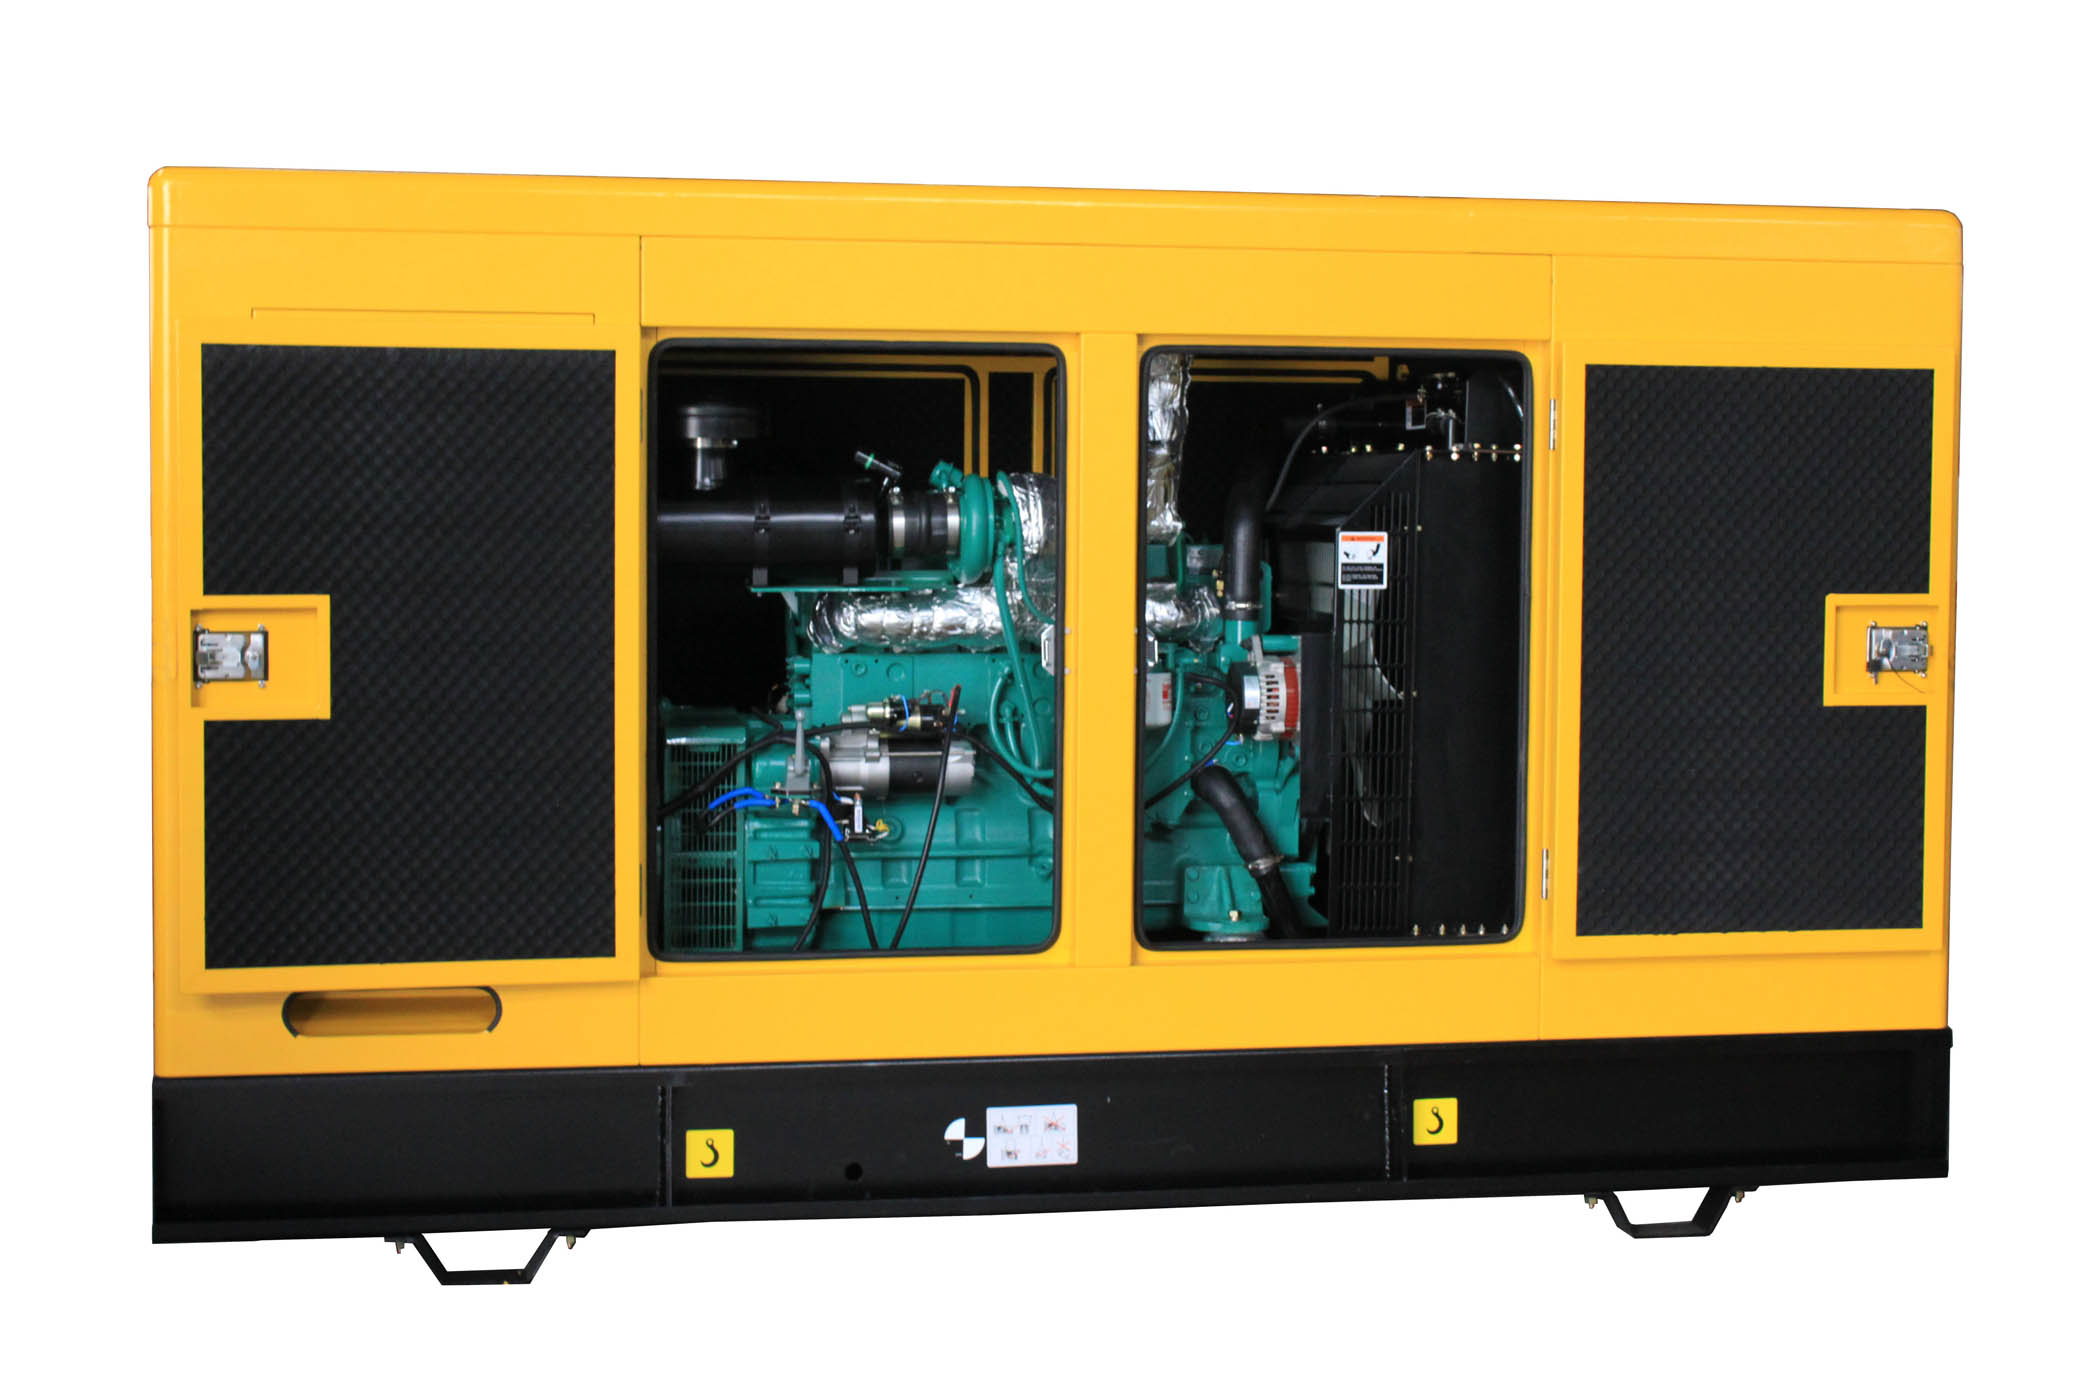 Knowing these six points, the fuel consumption problem of your 100 kW diesel generator set is easy to handle